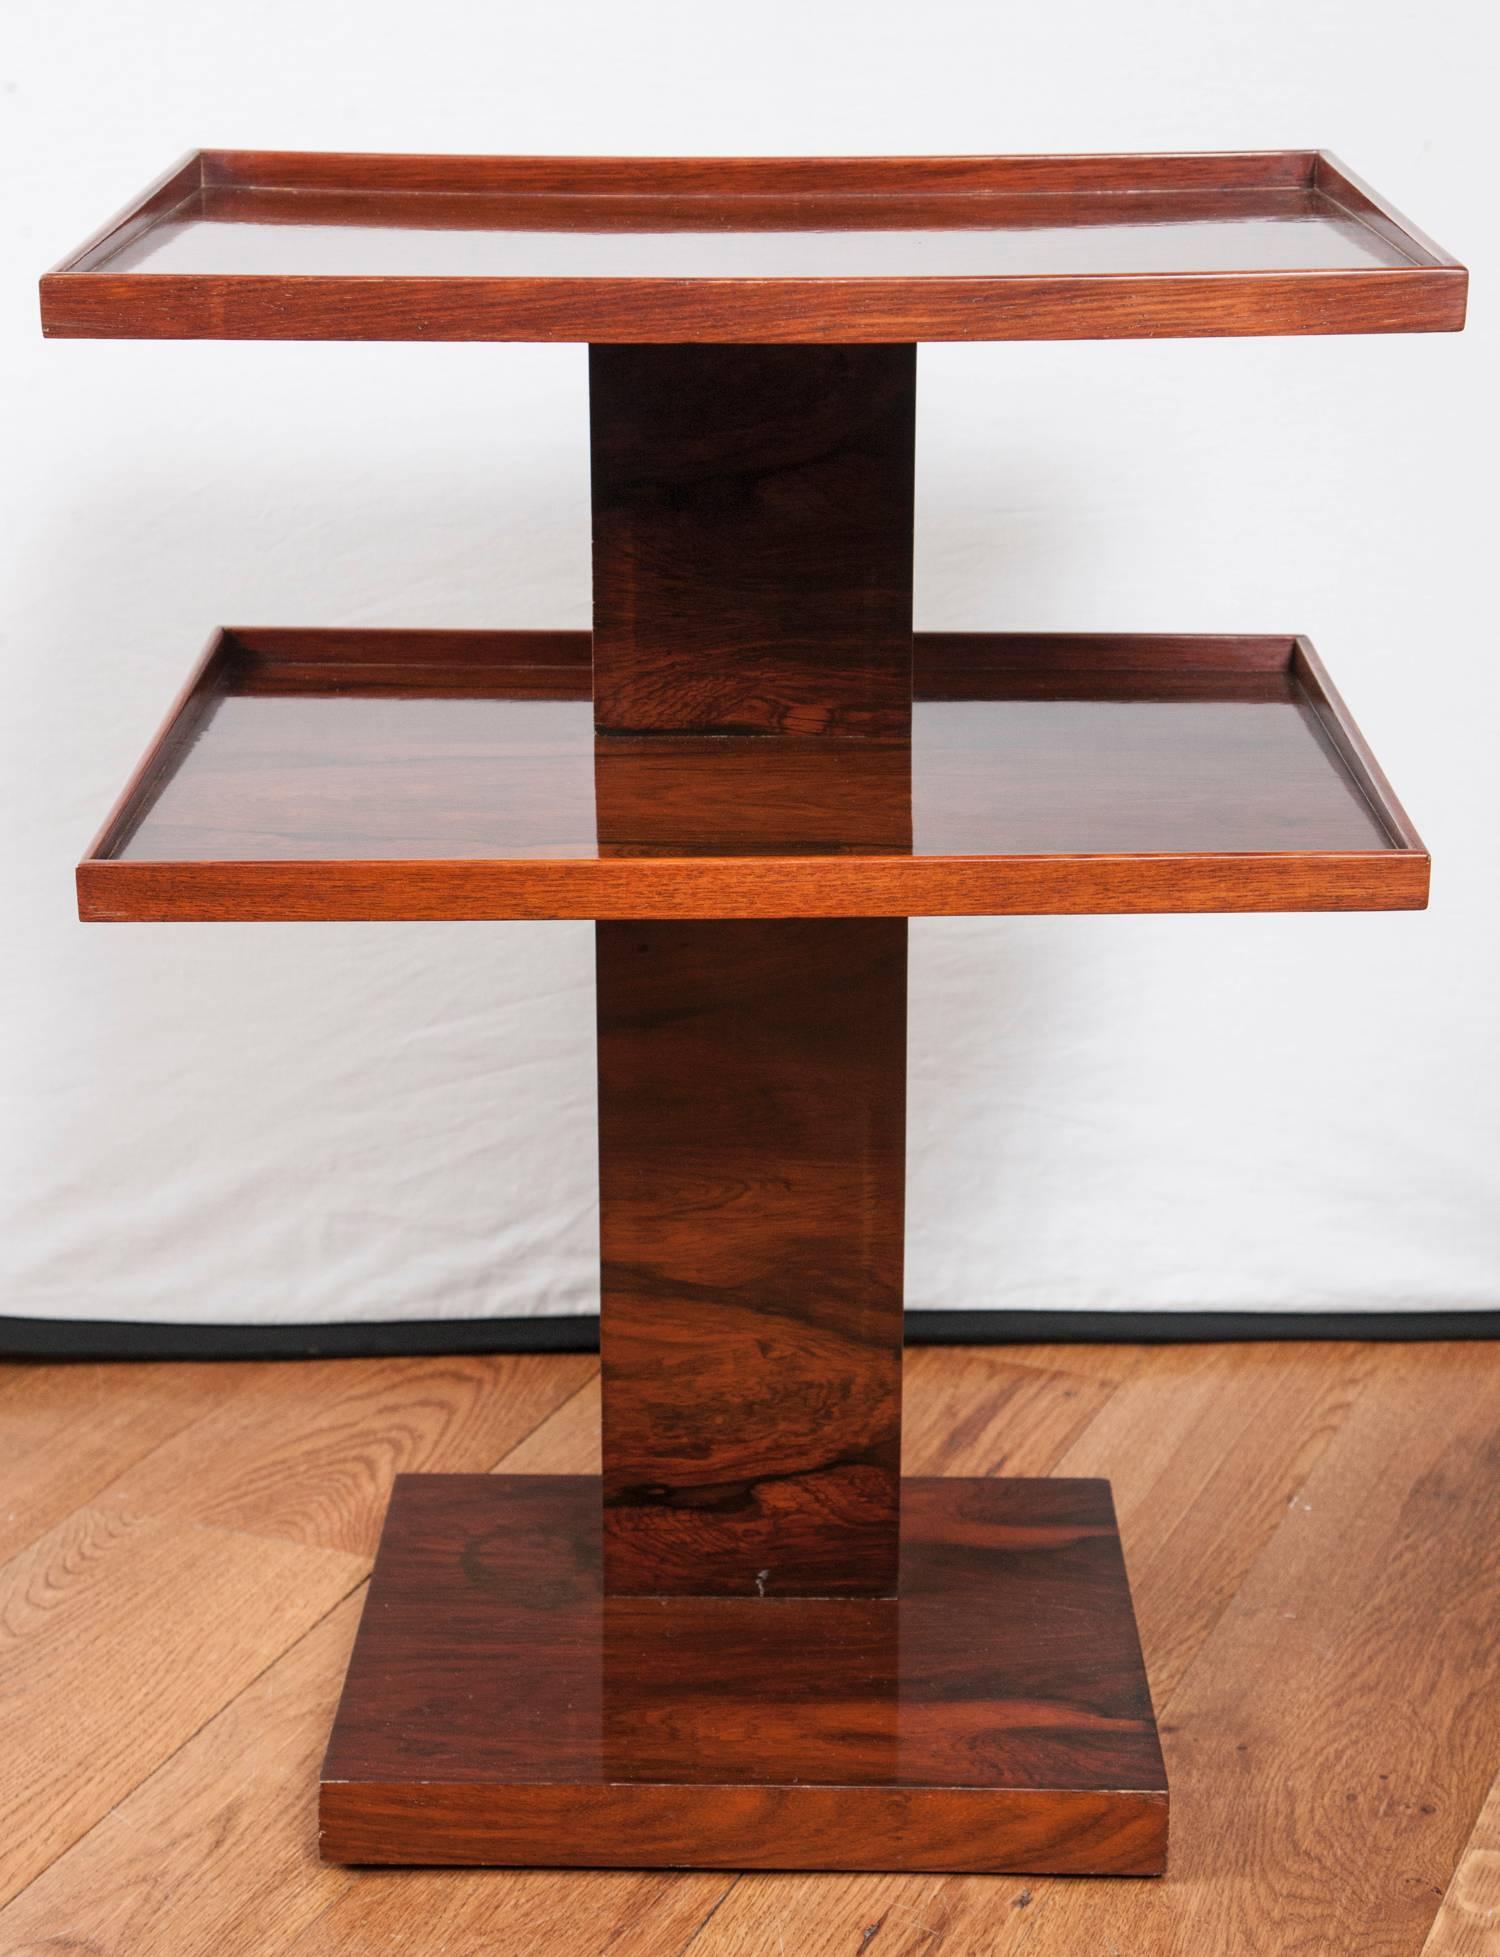 An extraordinary French Arte Moderne étagère table finished on all sides in a rosewood veneer, note sculptural quality and tapering side angles of the upper plateaus, circa 1930.